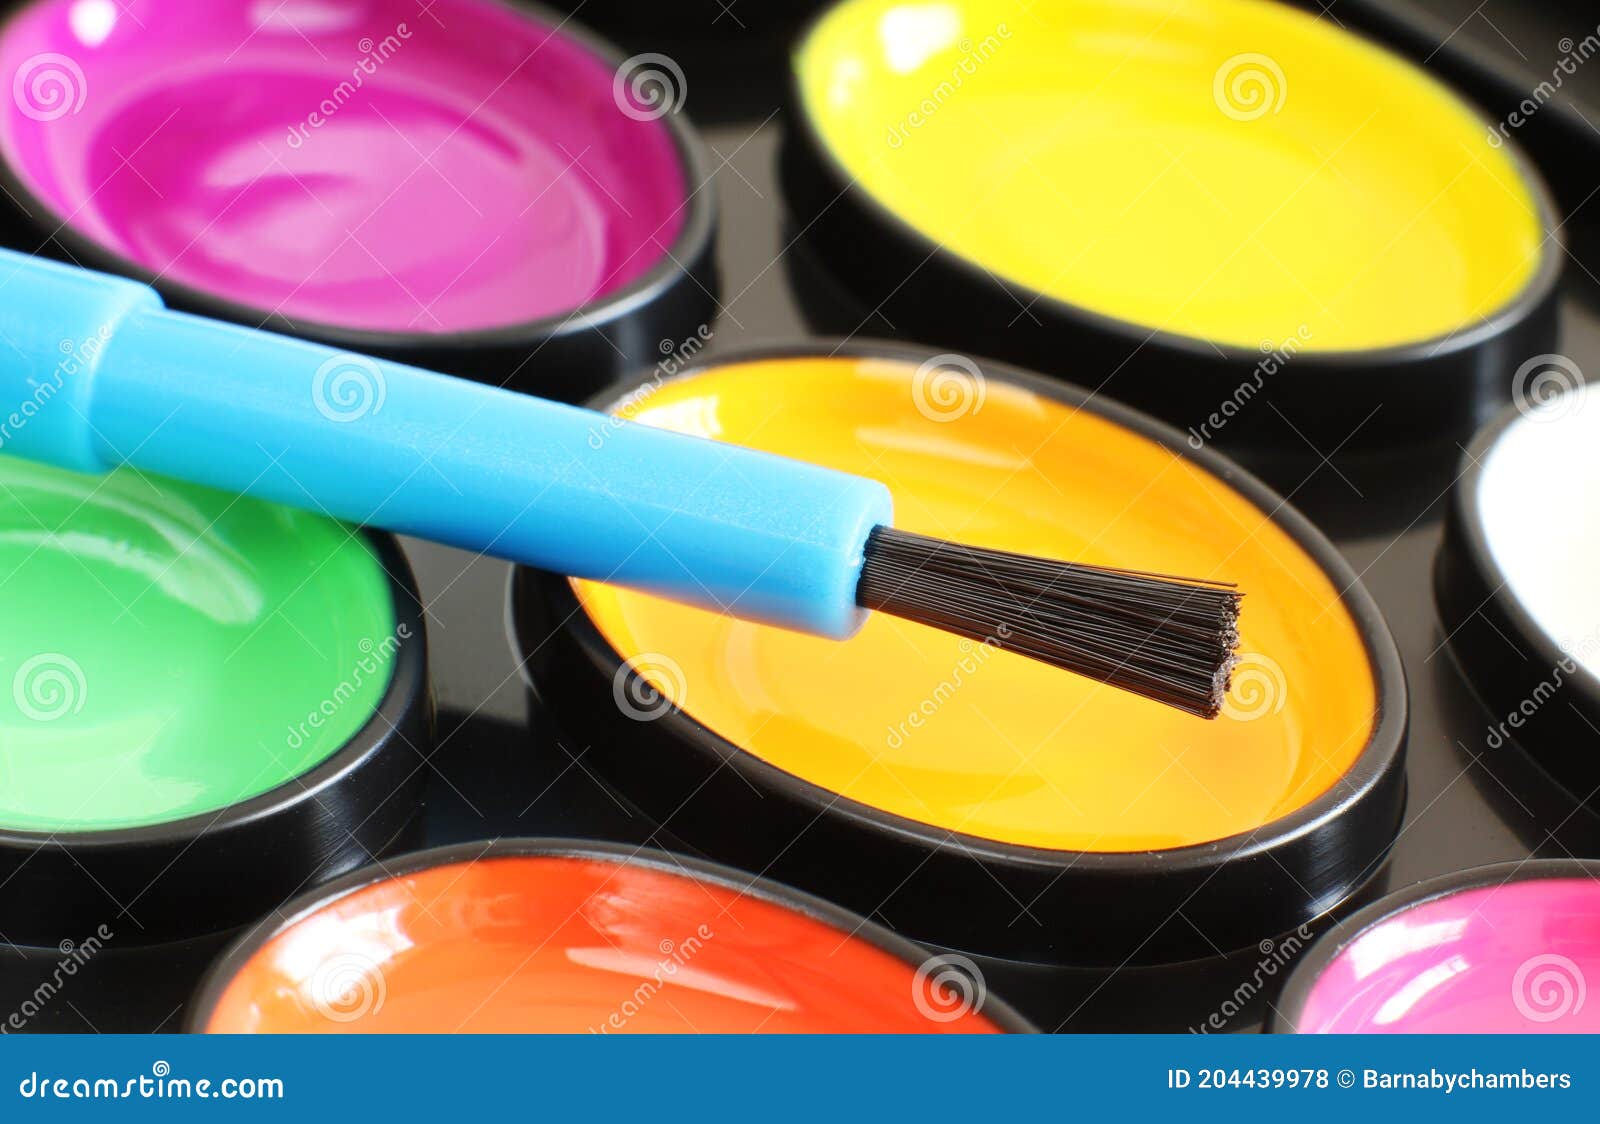 brightly coloured paint and pencils